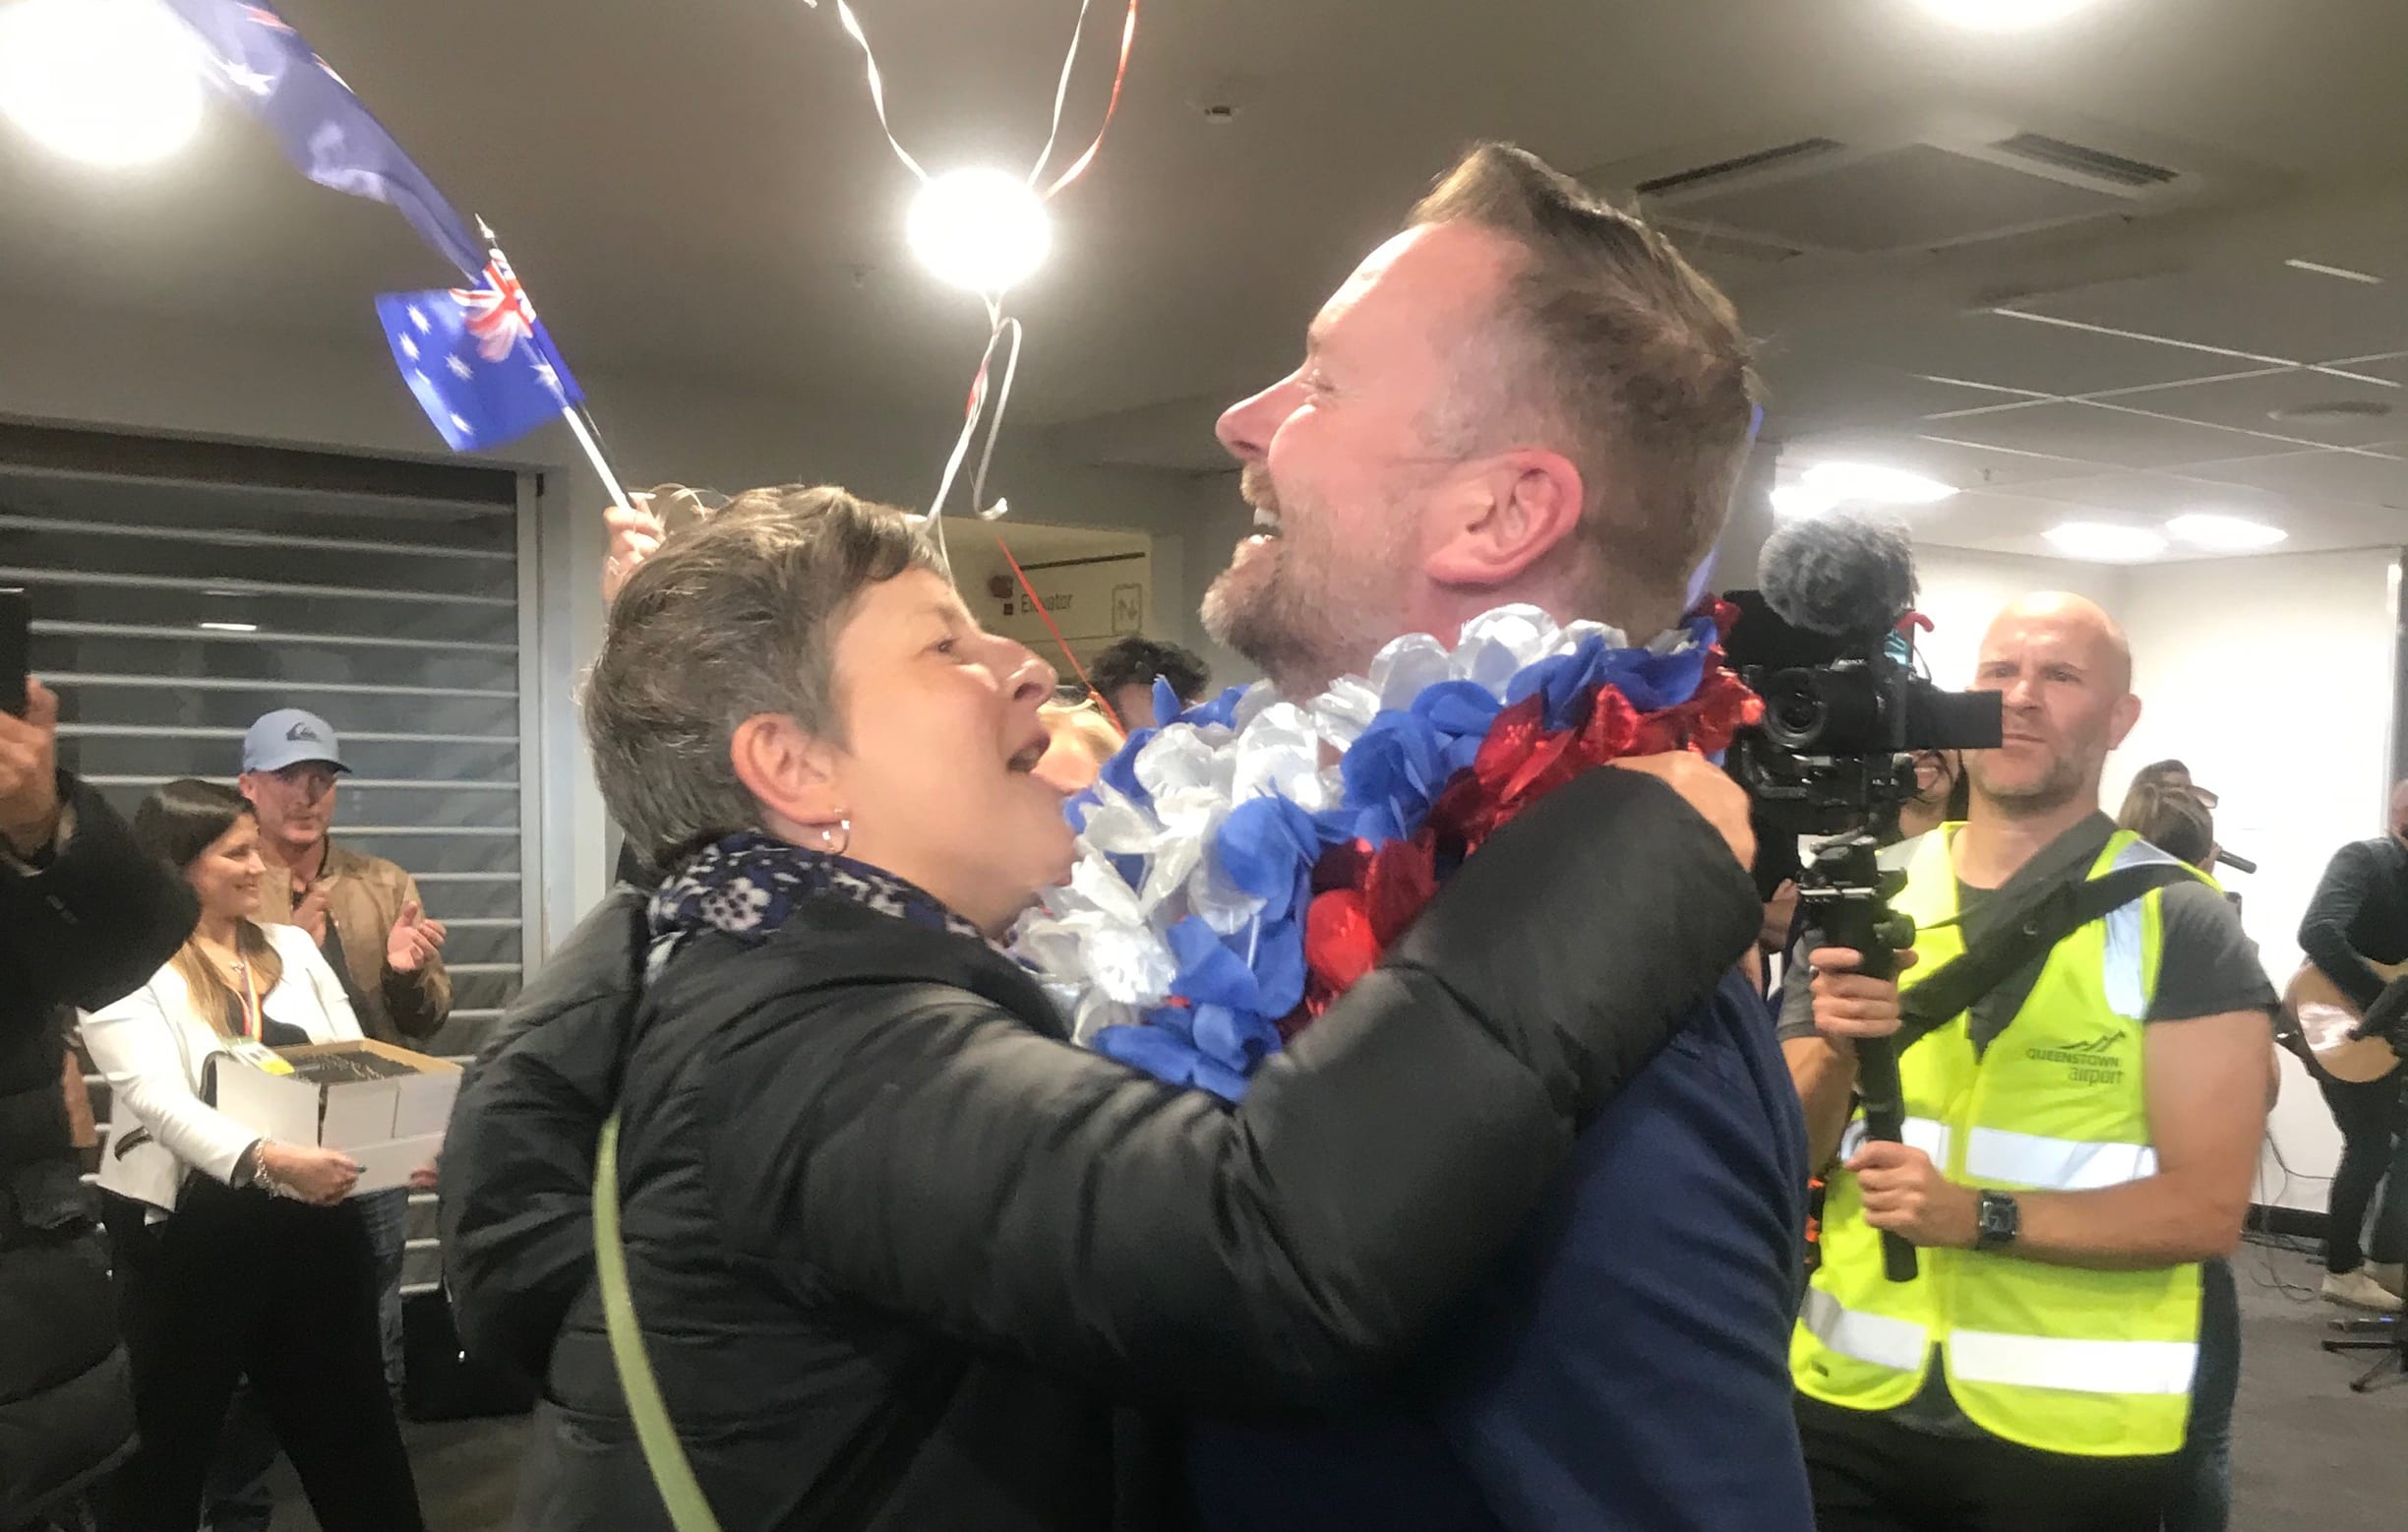 An emotional reunion as loved ones greet each other at Queenstown Airport